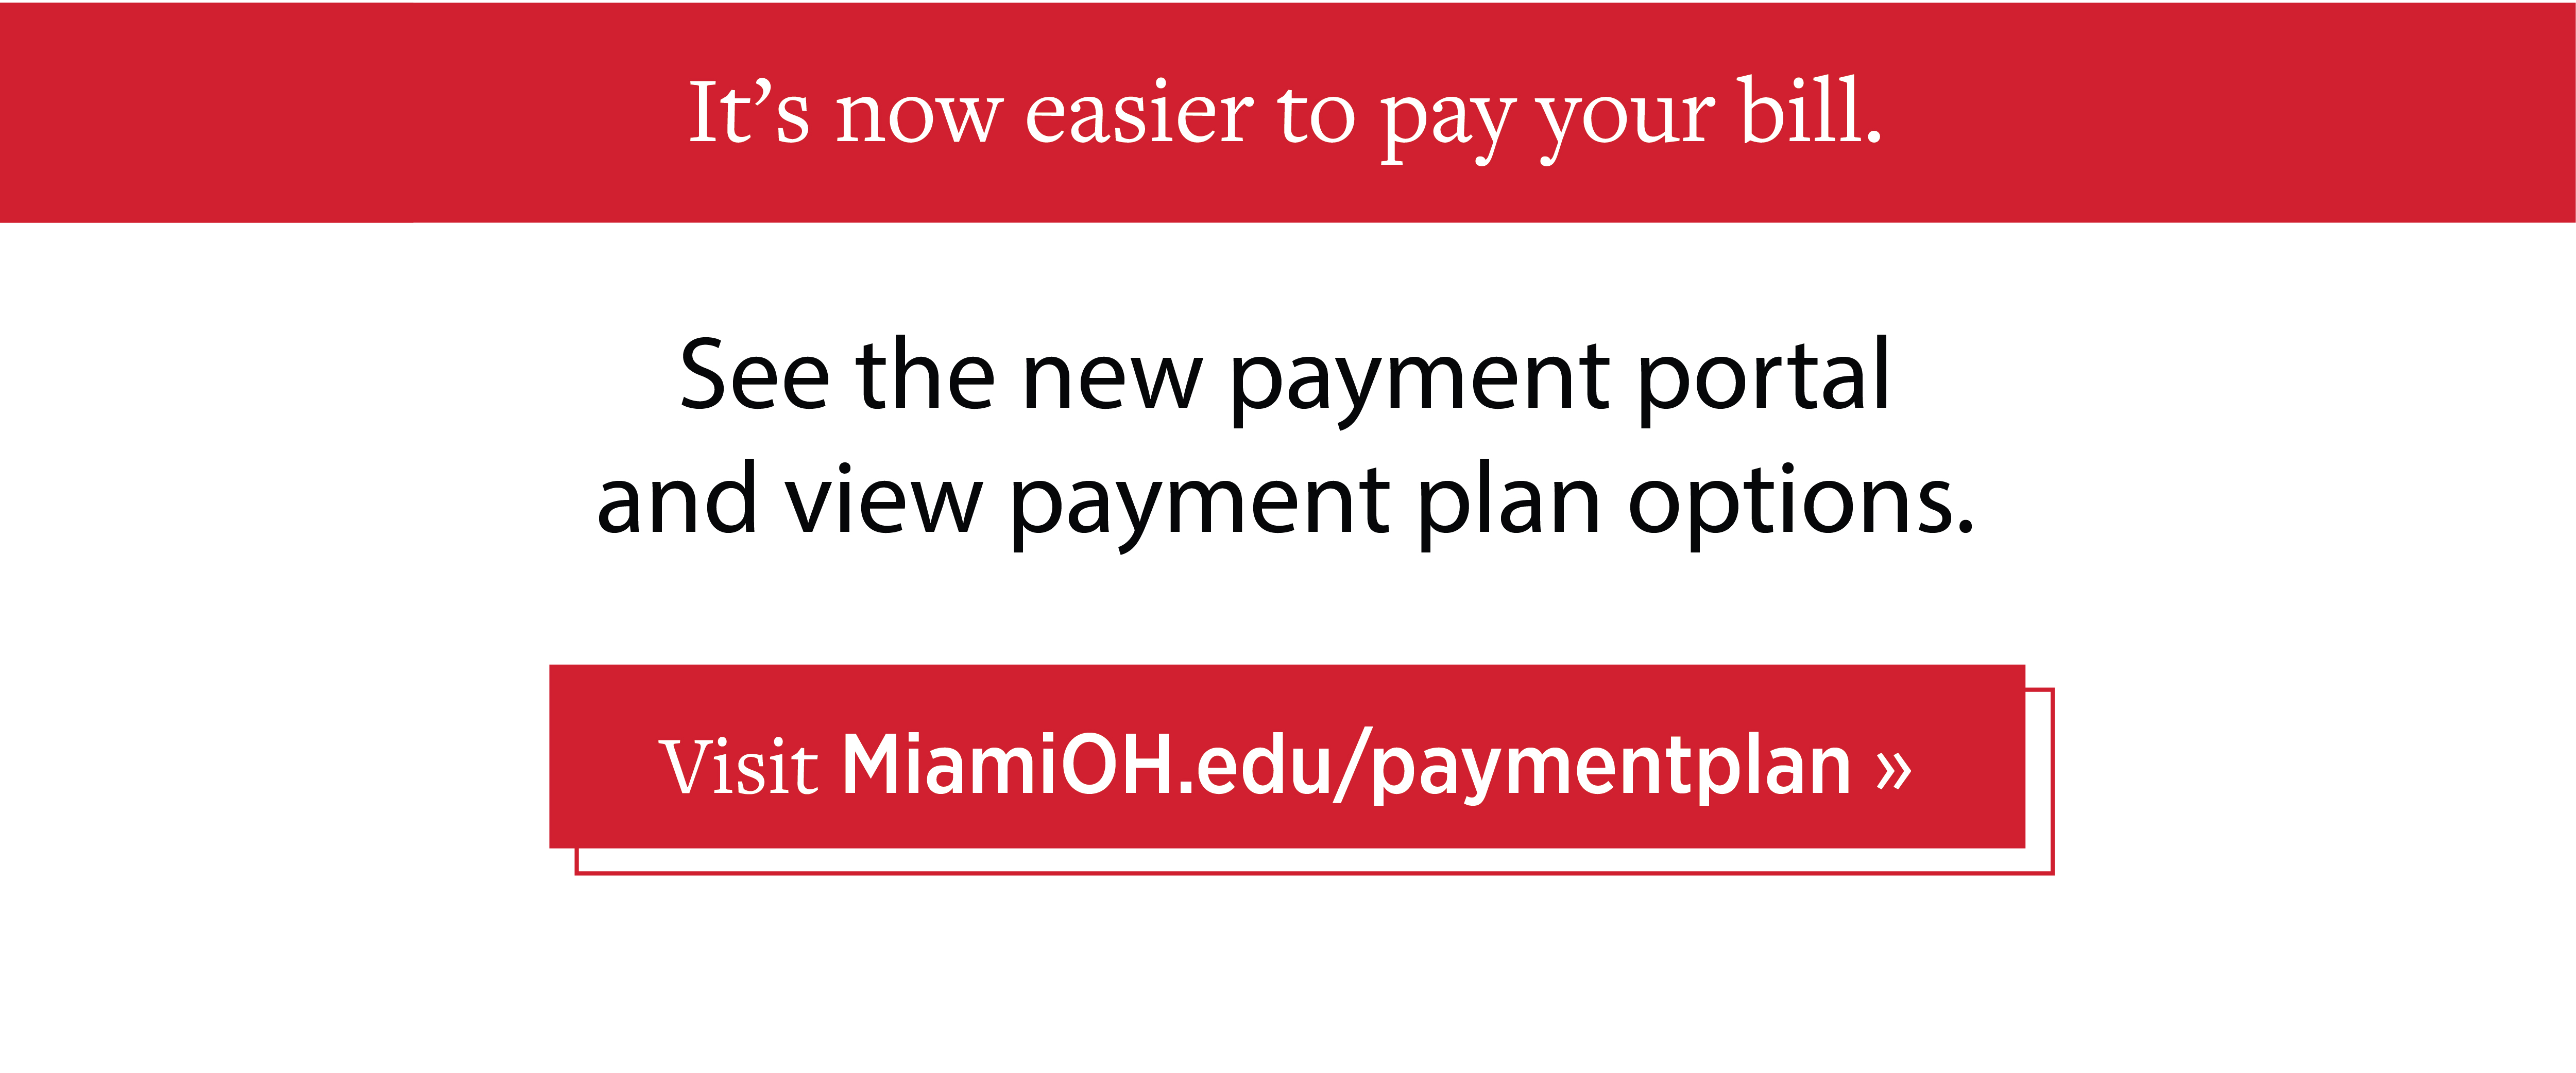  It's now easier to pay your bill. See the new payment portal and payment plan options. Visit MiamiOH.edu/paymentplan